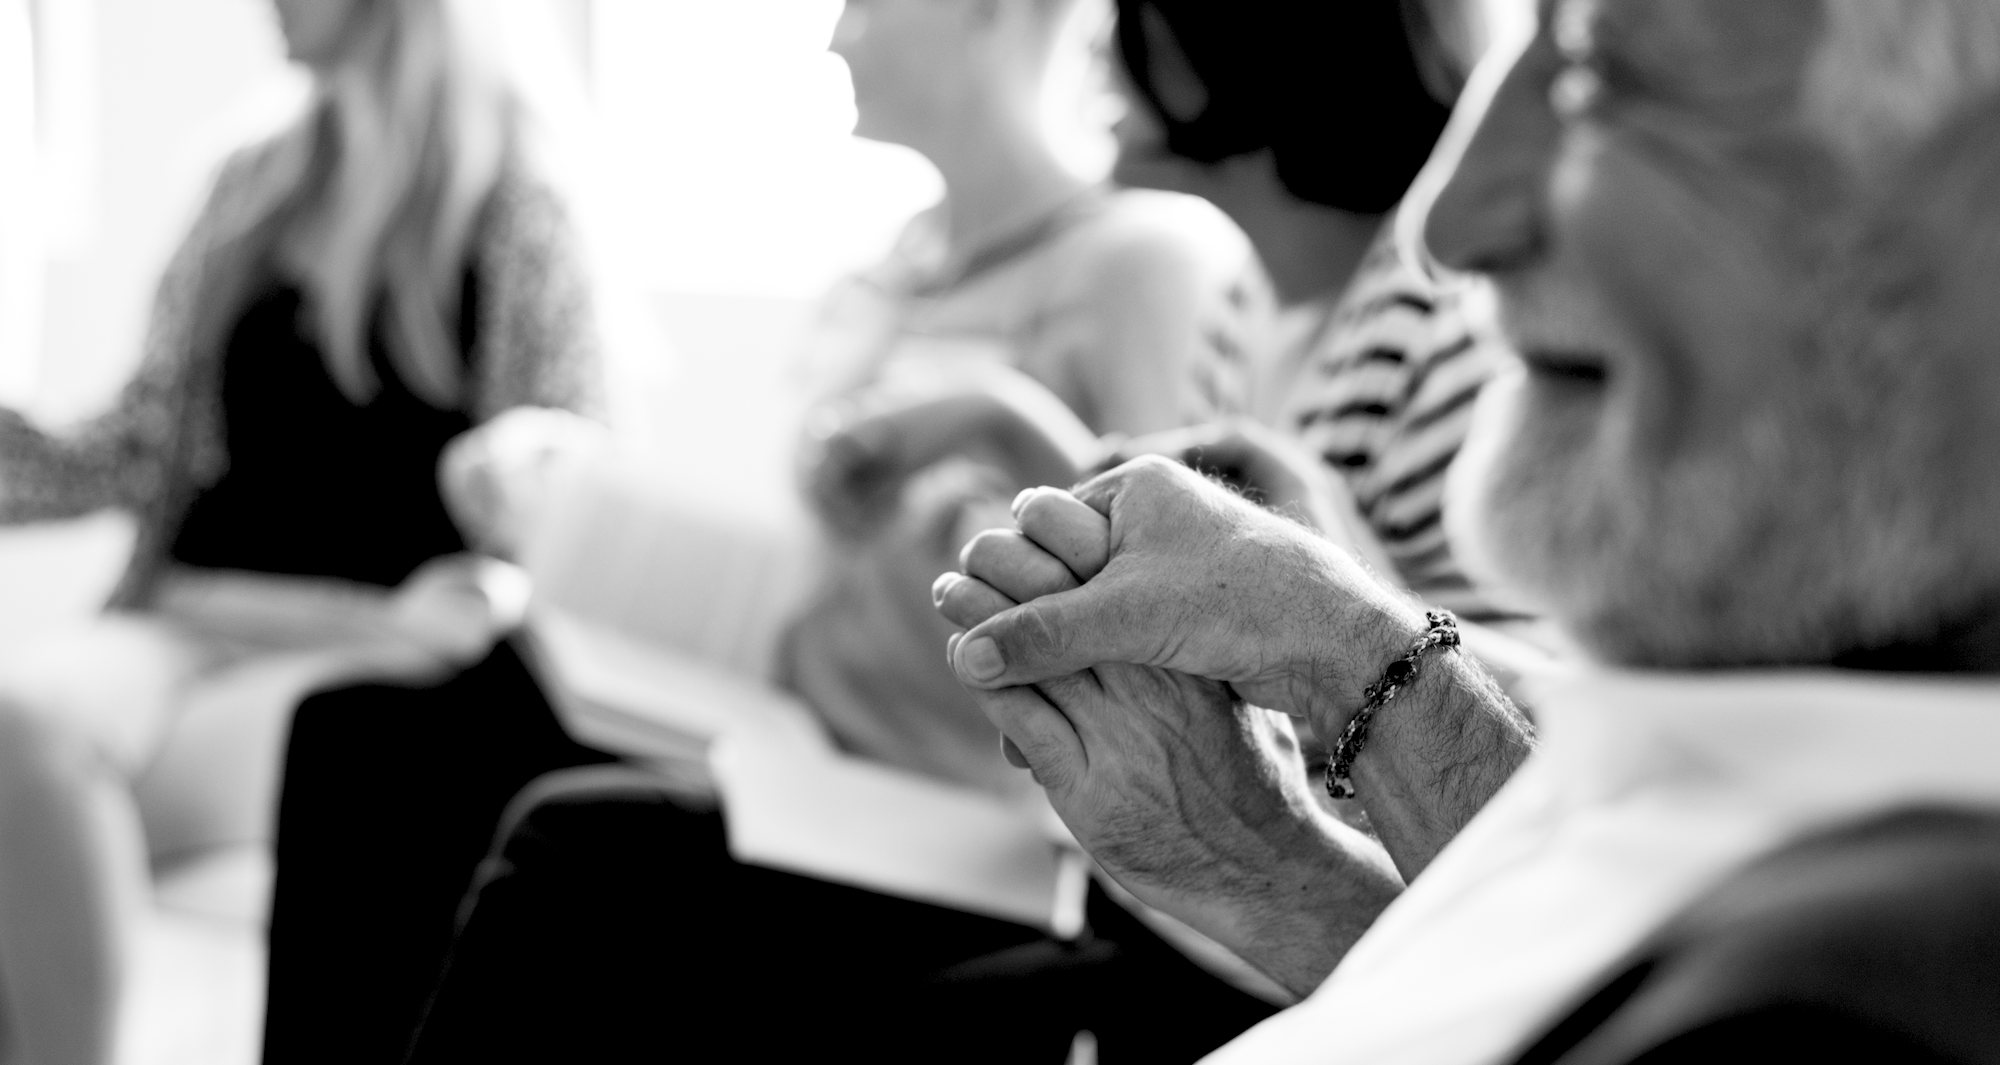 Two older people hold hands in black and white image.